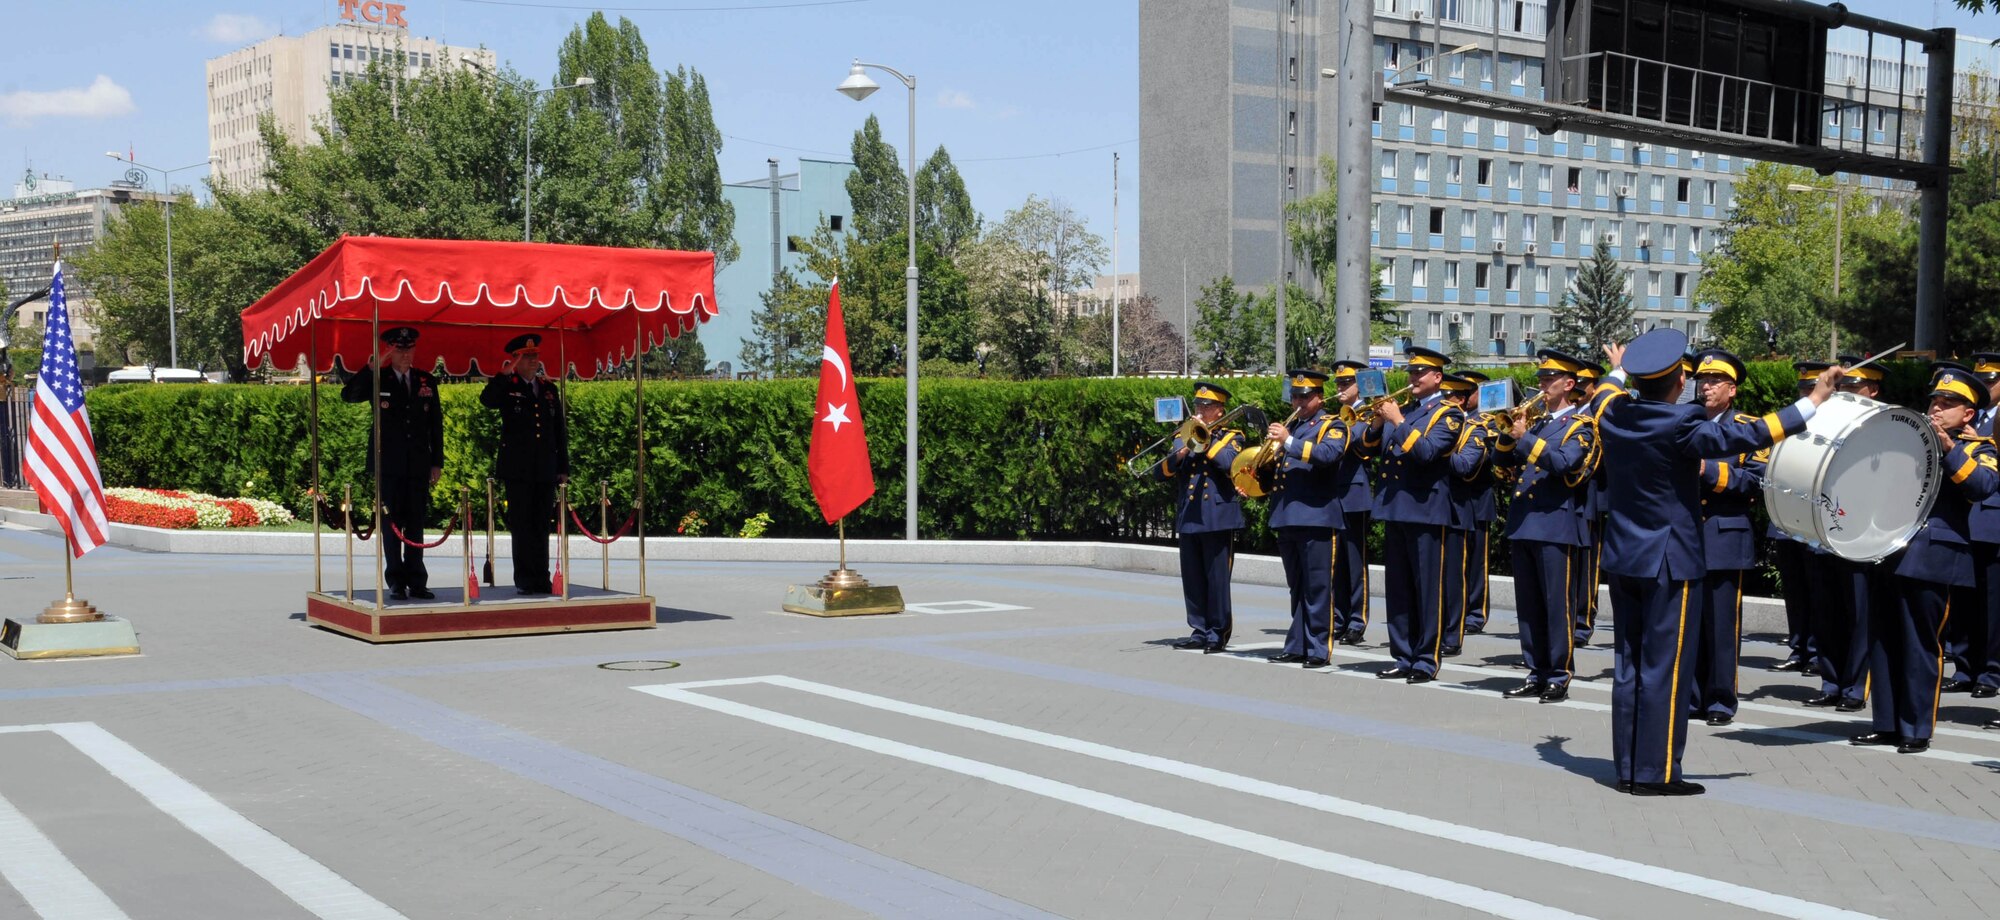 Air Force Chief of Staff Gen. Norton Schwartz and Gen. Hasan Aksay, commander of the Turkish air force, salute during a welcome ceremony at the Turkish air force headquarters July 19, 2010, in Ankara, Turkey. The ceremony welcomed General Schwartz for his multi-day visit to Turkey. A Turkish military band played the U.S. and Turkish national anthems during the ceremony. (U.S. Air Force photo/Senior Airman Ashley Wood)